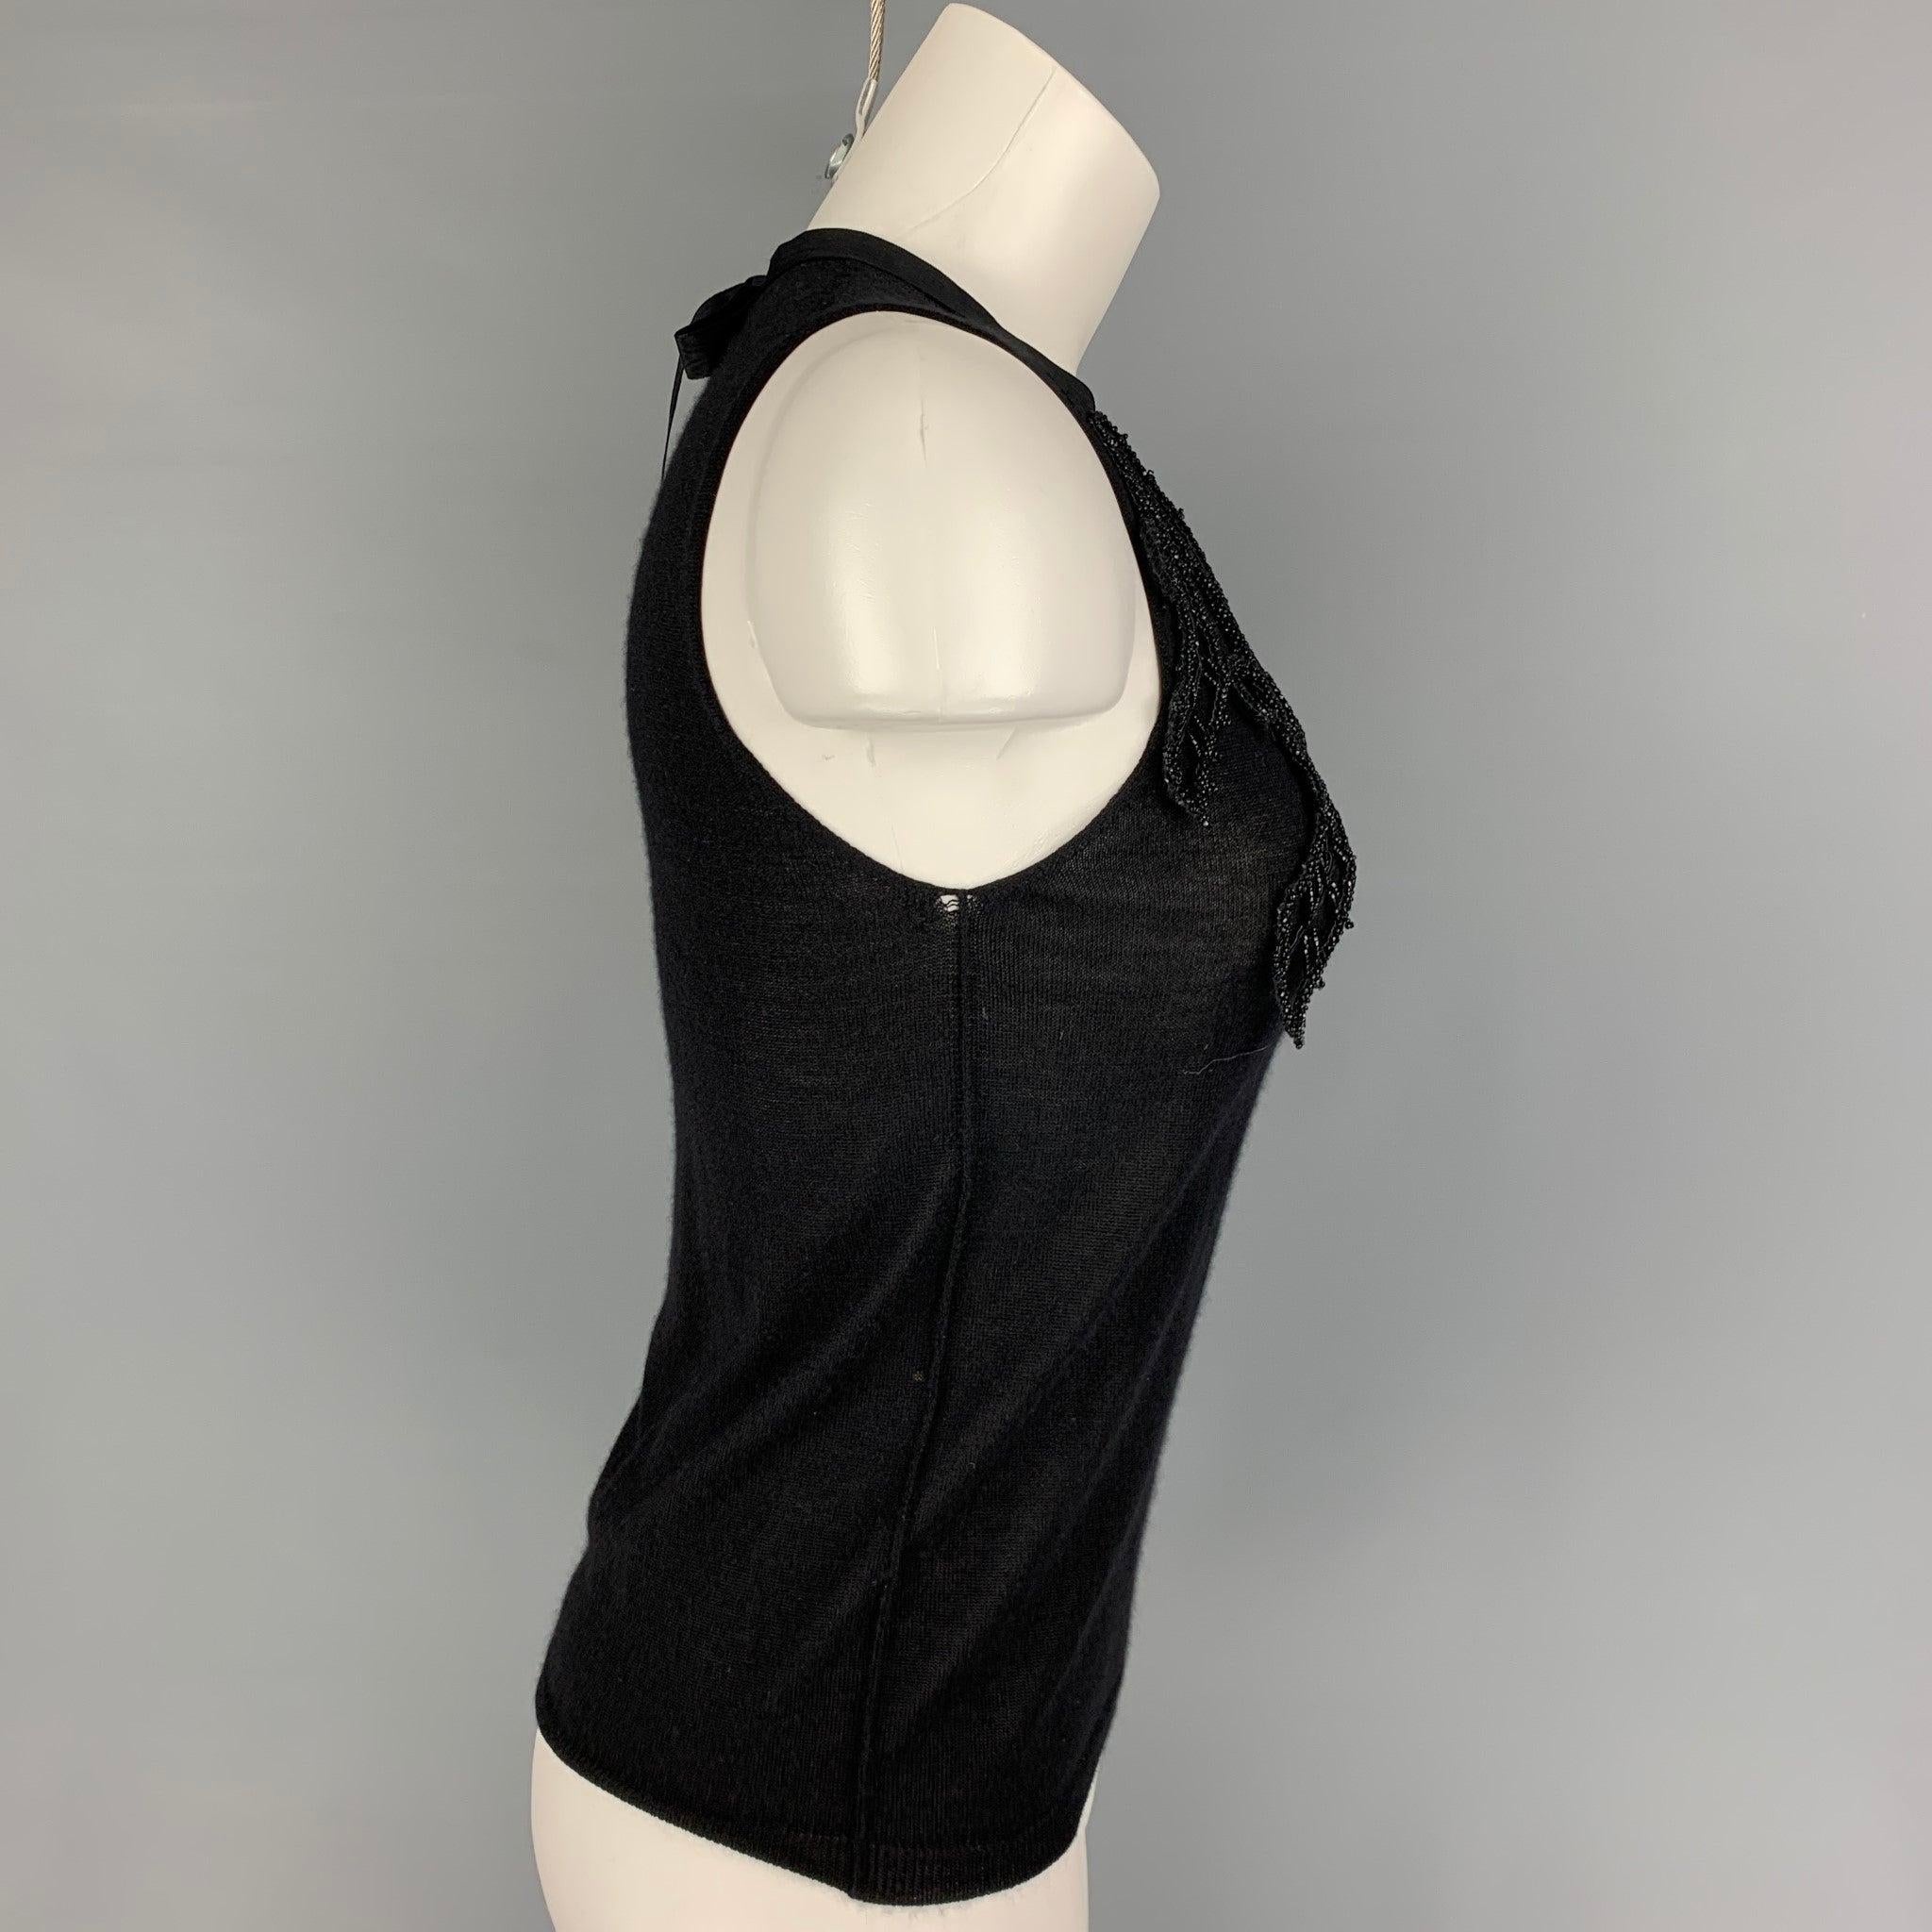 PRADA dress top comes in a black knitted material featuring a front beaded design, self-tie detail, and a sleeveless style. Made in Italy. Very Good
Pre-Owned Condition. 

Marked:   42 

Measurements: 
 
Shoulder: 11.25 inches  Bust: 29 inches 